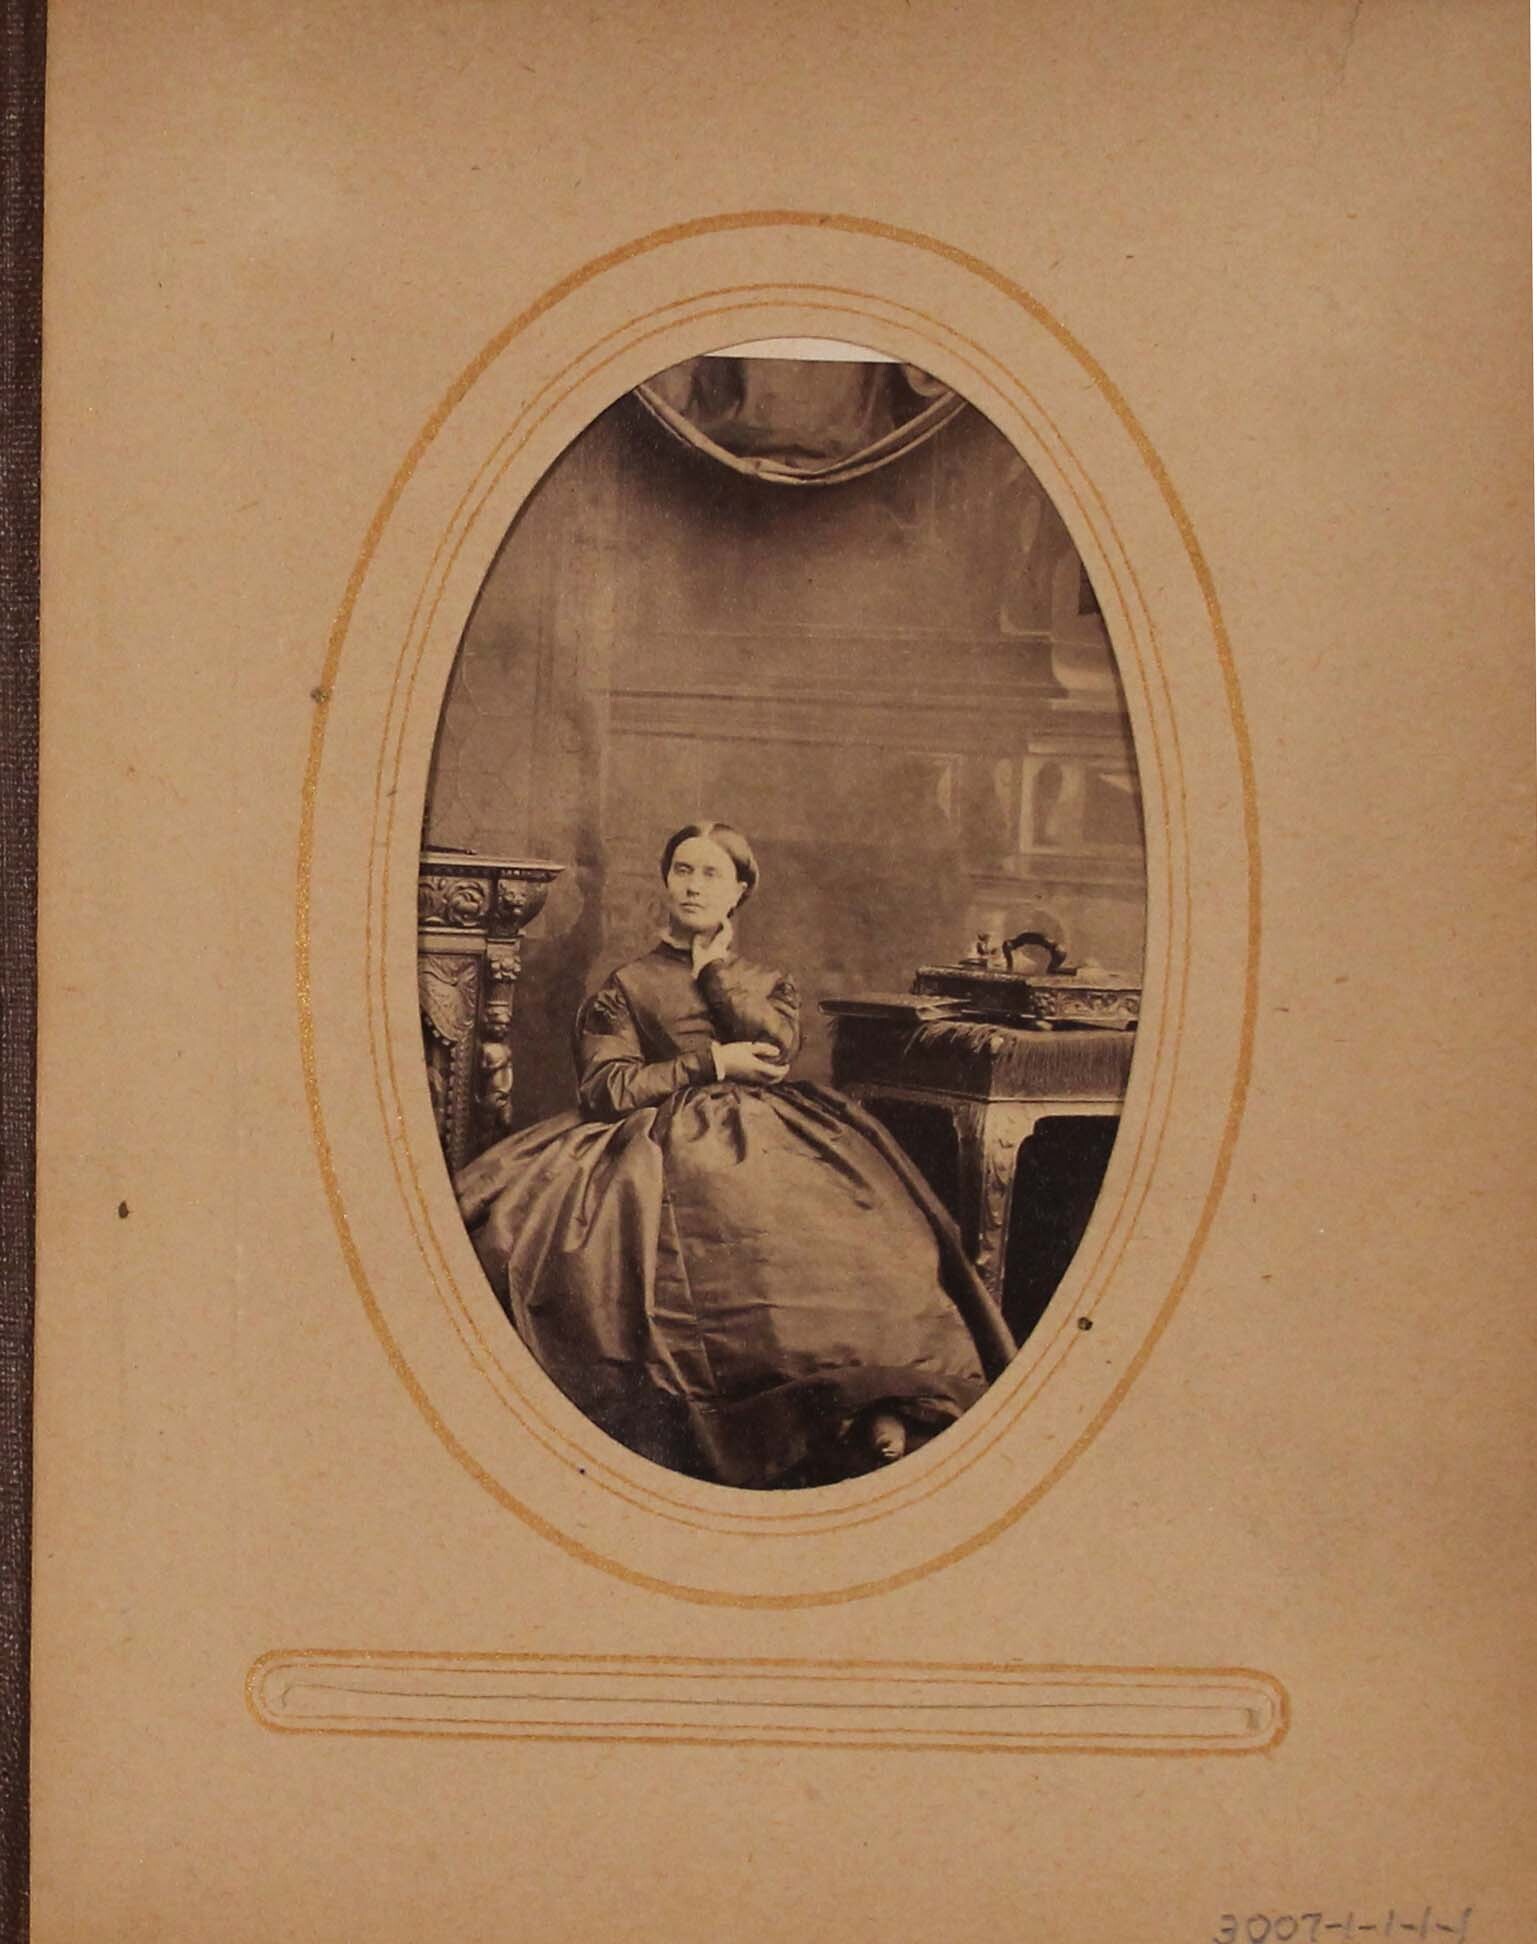 Black and white photograph of woman seated in between fire place and desk.